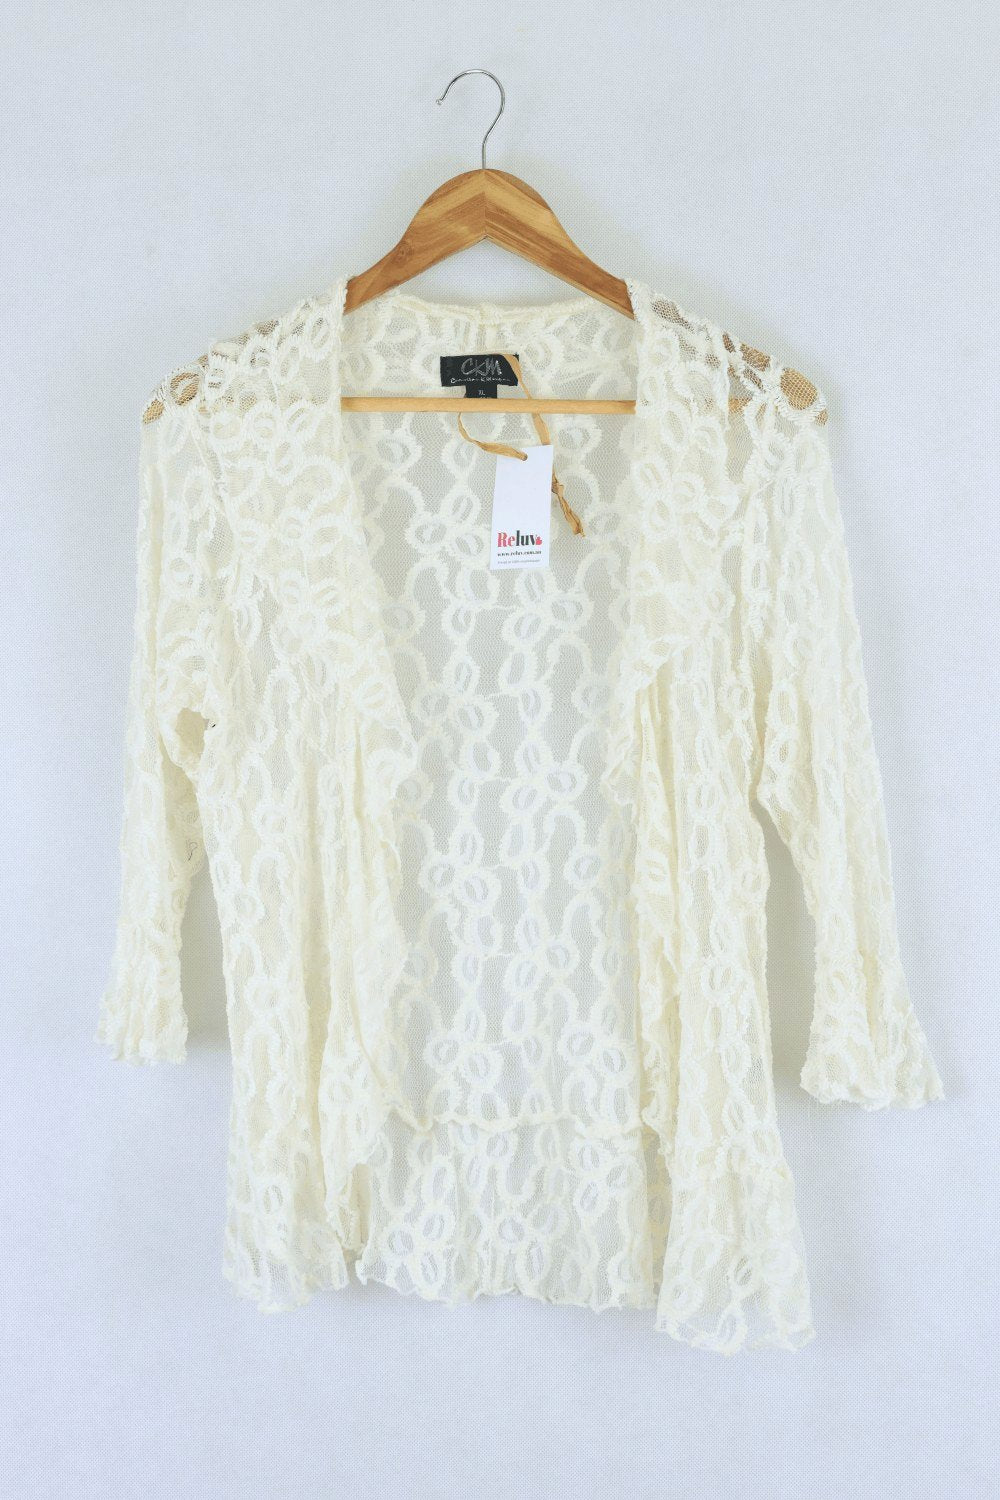 Ckm White Lace Cardigan Xl